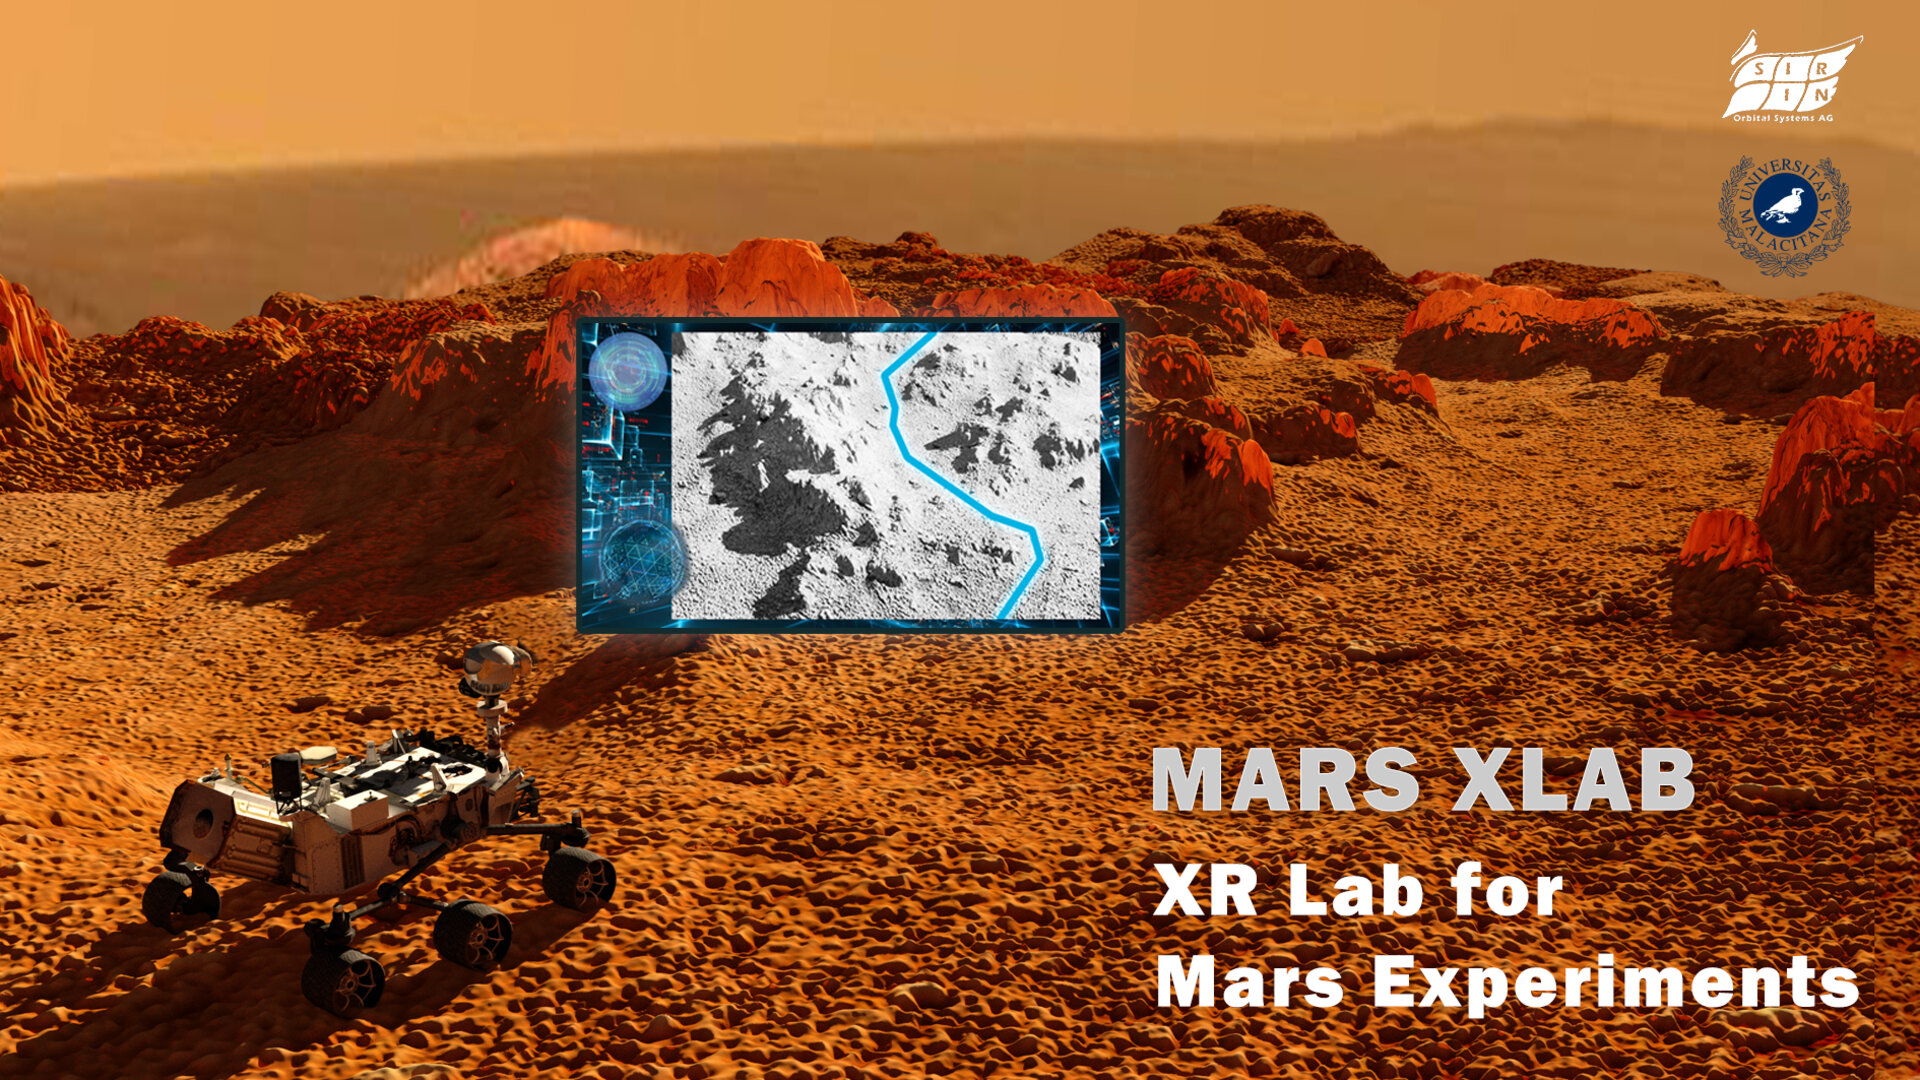 Extended reality lab for Mars experiments (Mars Xlab)